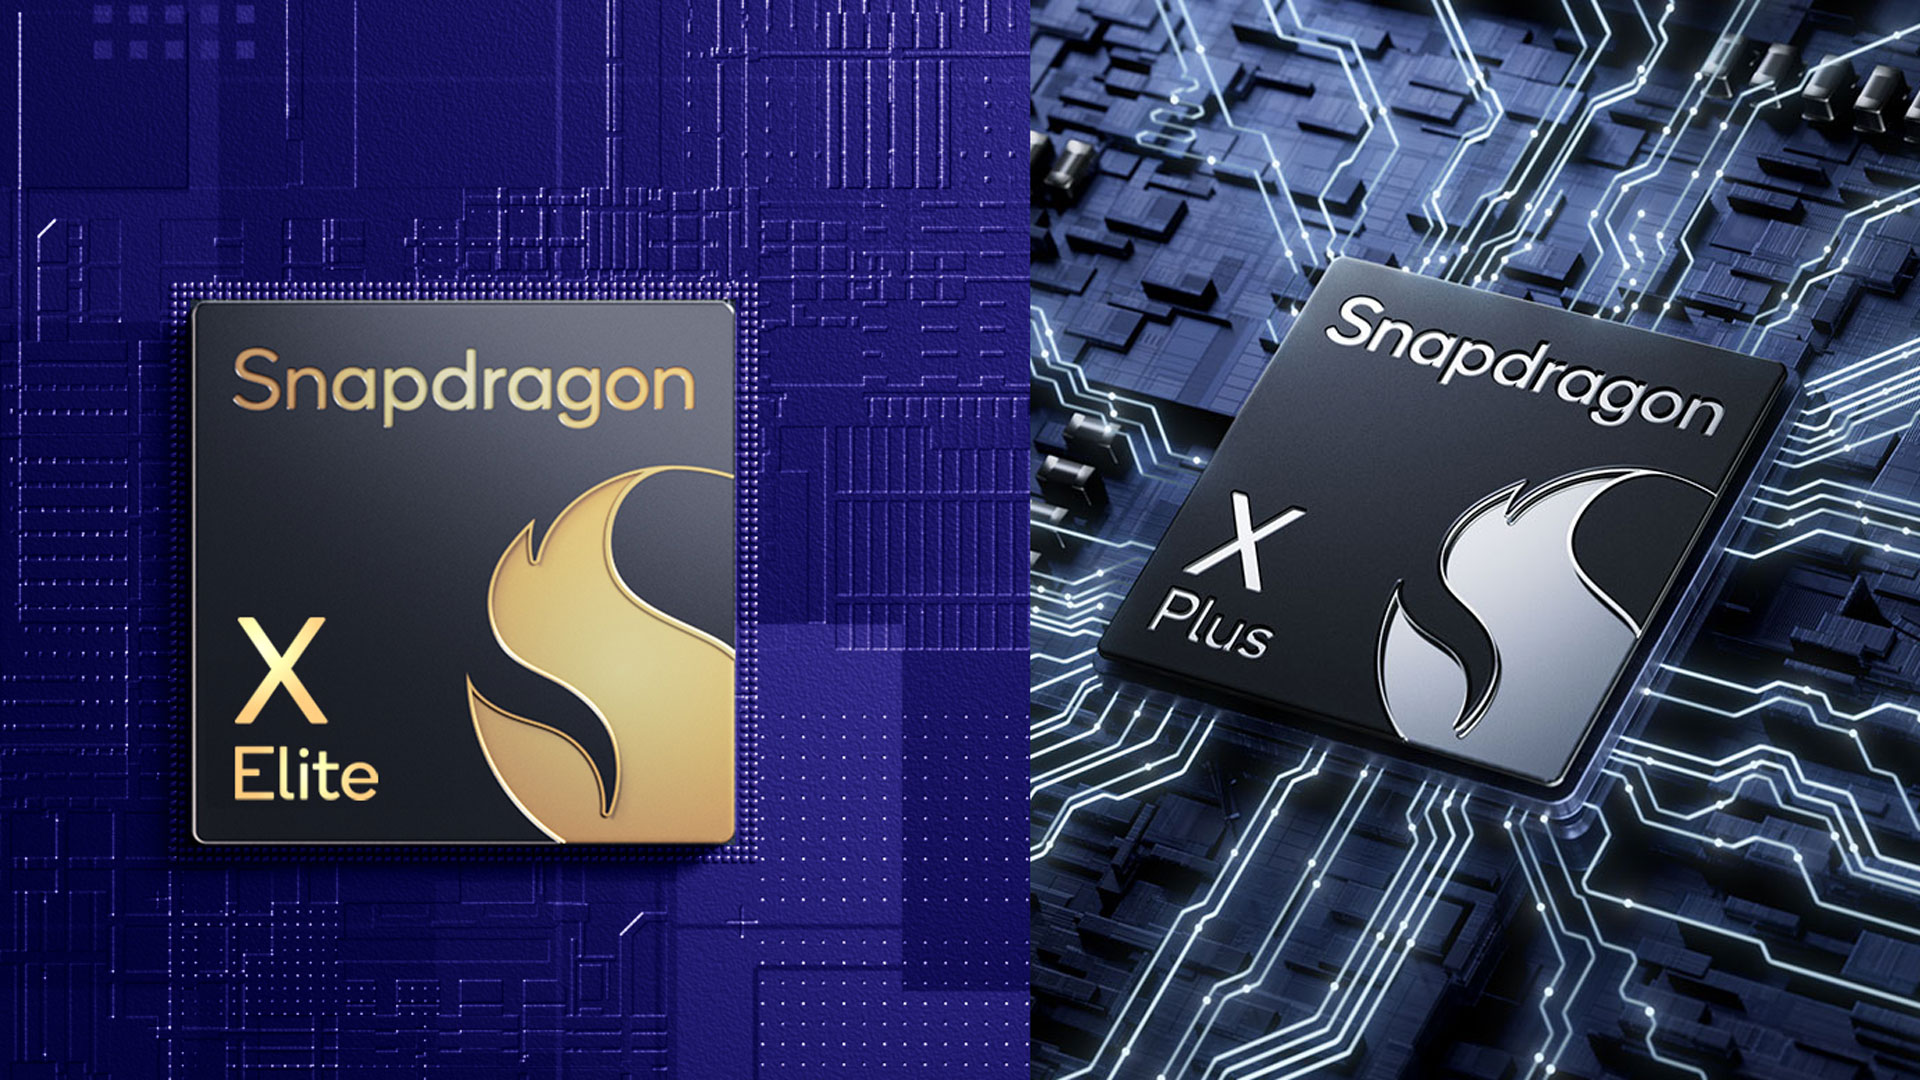 Qualcomm Snapdragon X Elite and X Plus: Specs, release date, benchmarks, and more